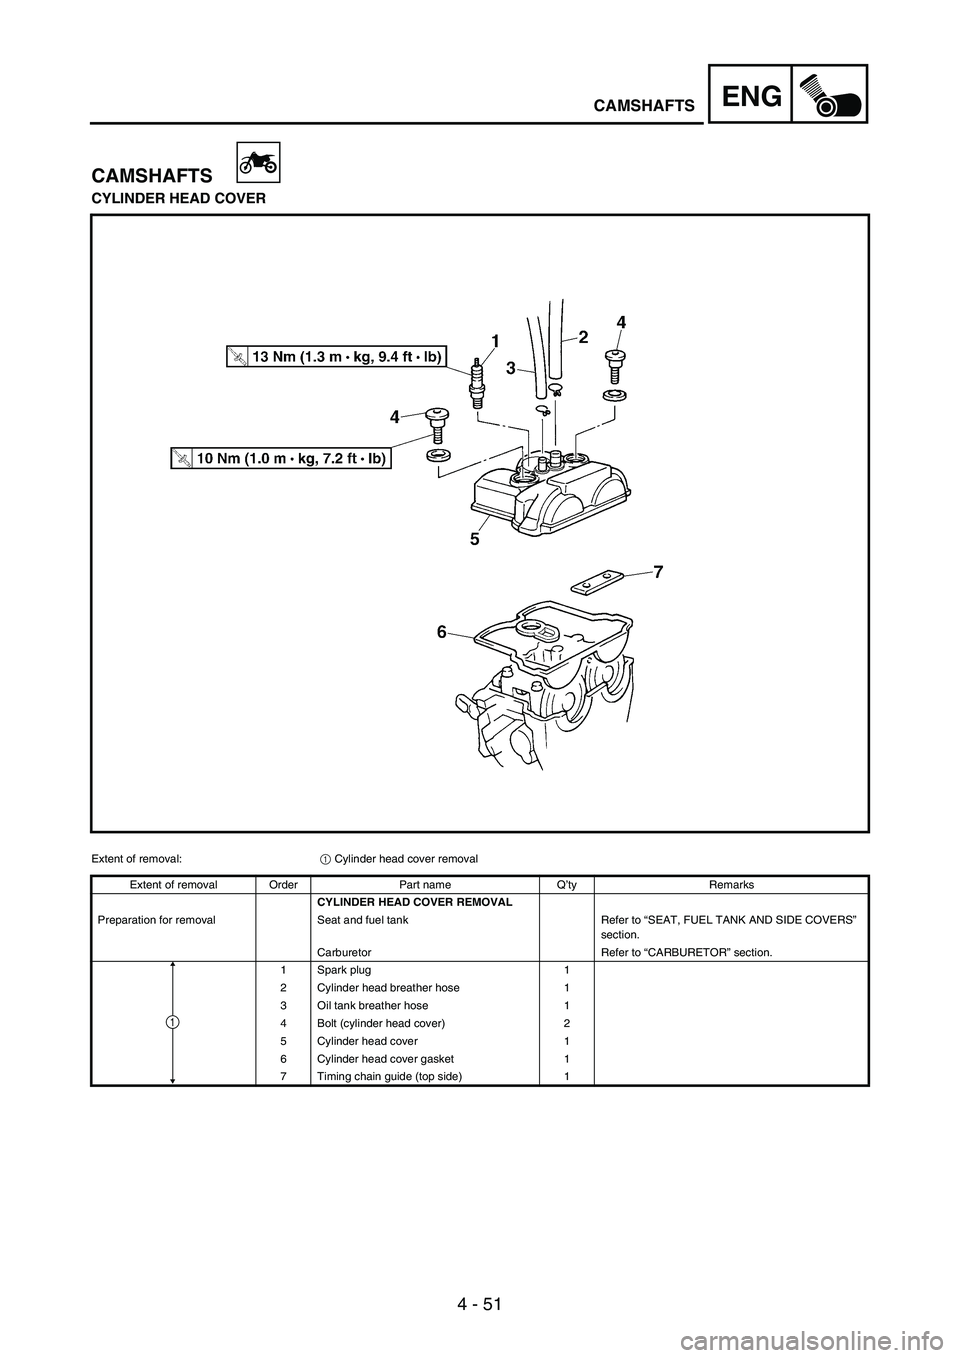 YAMAHA WR 250F 2005  Manuale duso (in Italian) 4 - 51
ENGCAMSHAFTS
CAMSHAFTS
CYLINDER HEAD COVER
Extent of removal:
1 Cylinder head cover removal
Extent of removal Order Part name Q’ty Remarks
CYLINDER HEAD COVER REMOVAL
Preparation for removal 